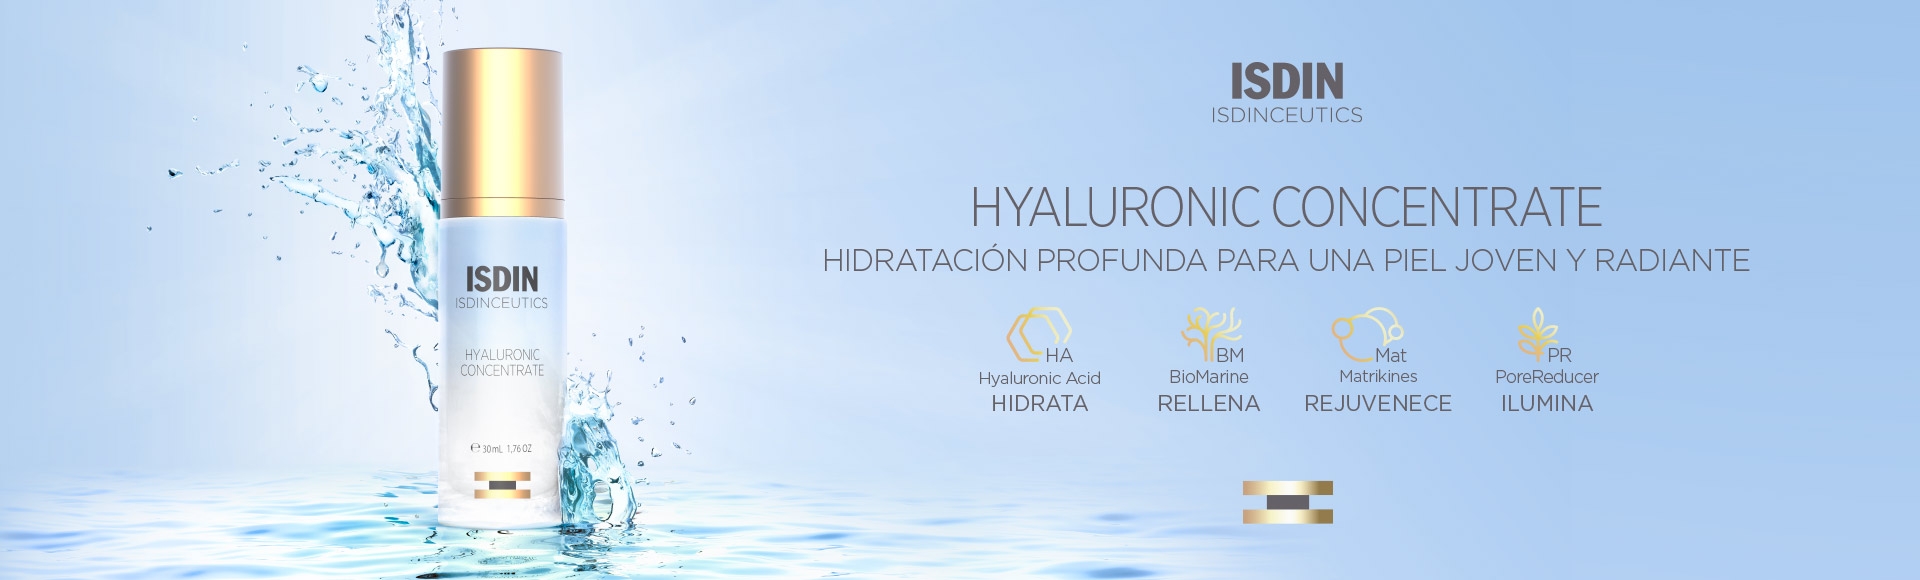 isdinceutics_hyaluronic_concentrate1.jpg